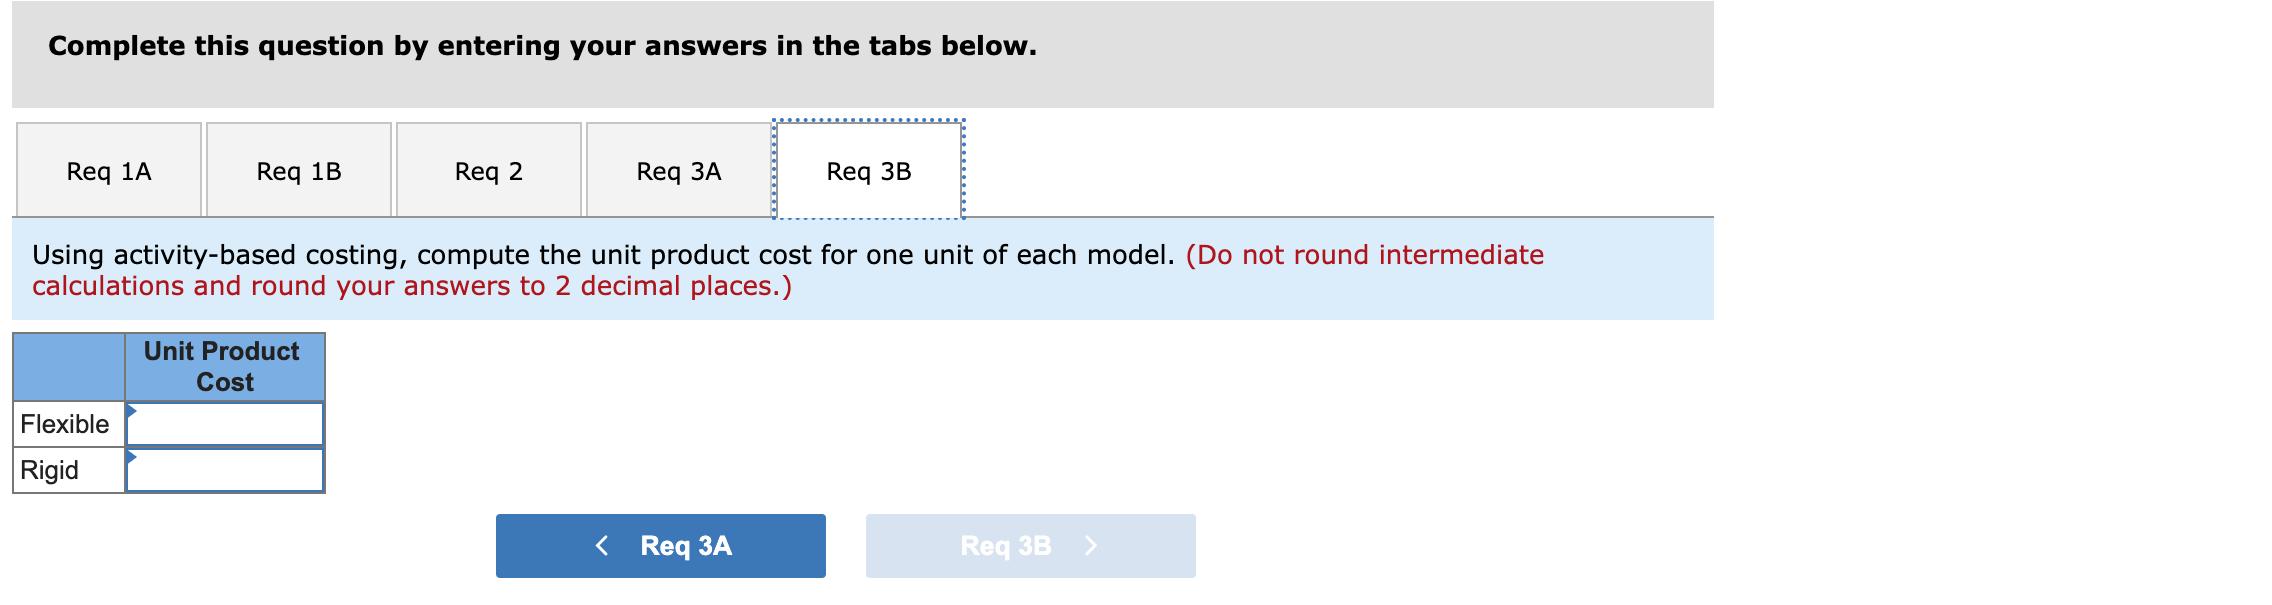 Complete this question by entering your answers in the tabs below. Req 1A Req 1B Flexible Rigid Req 2 Unit